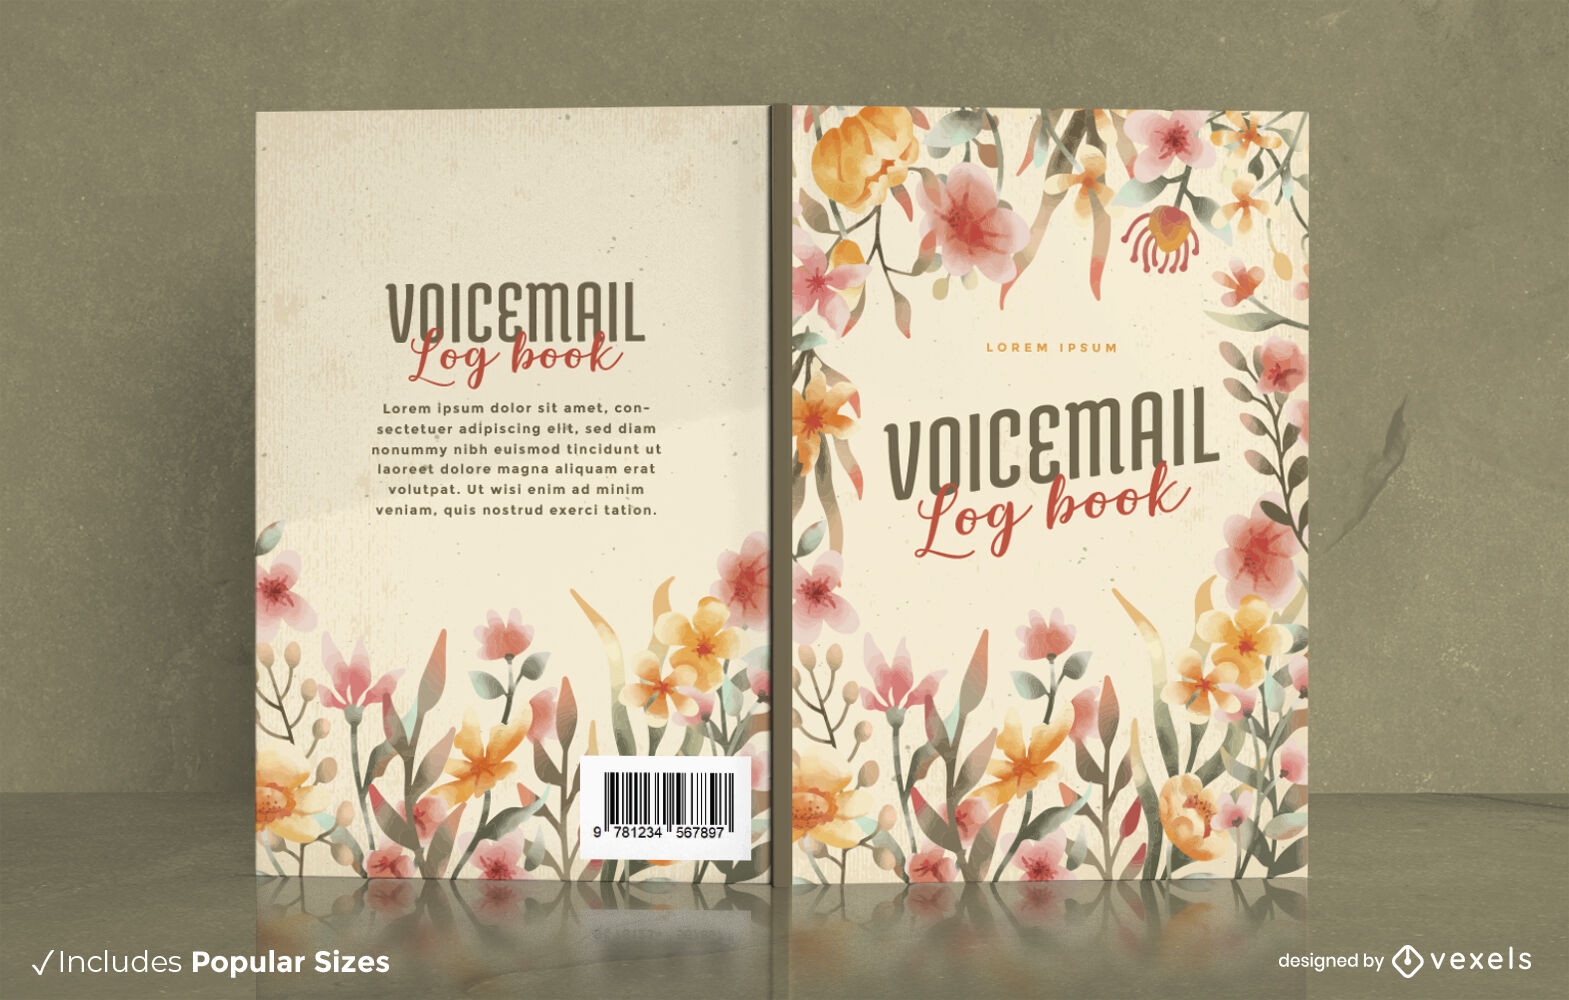 Voicemail log book cover design